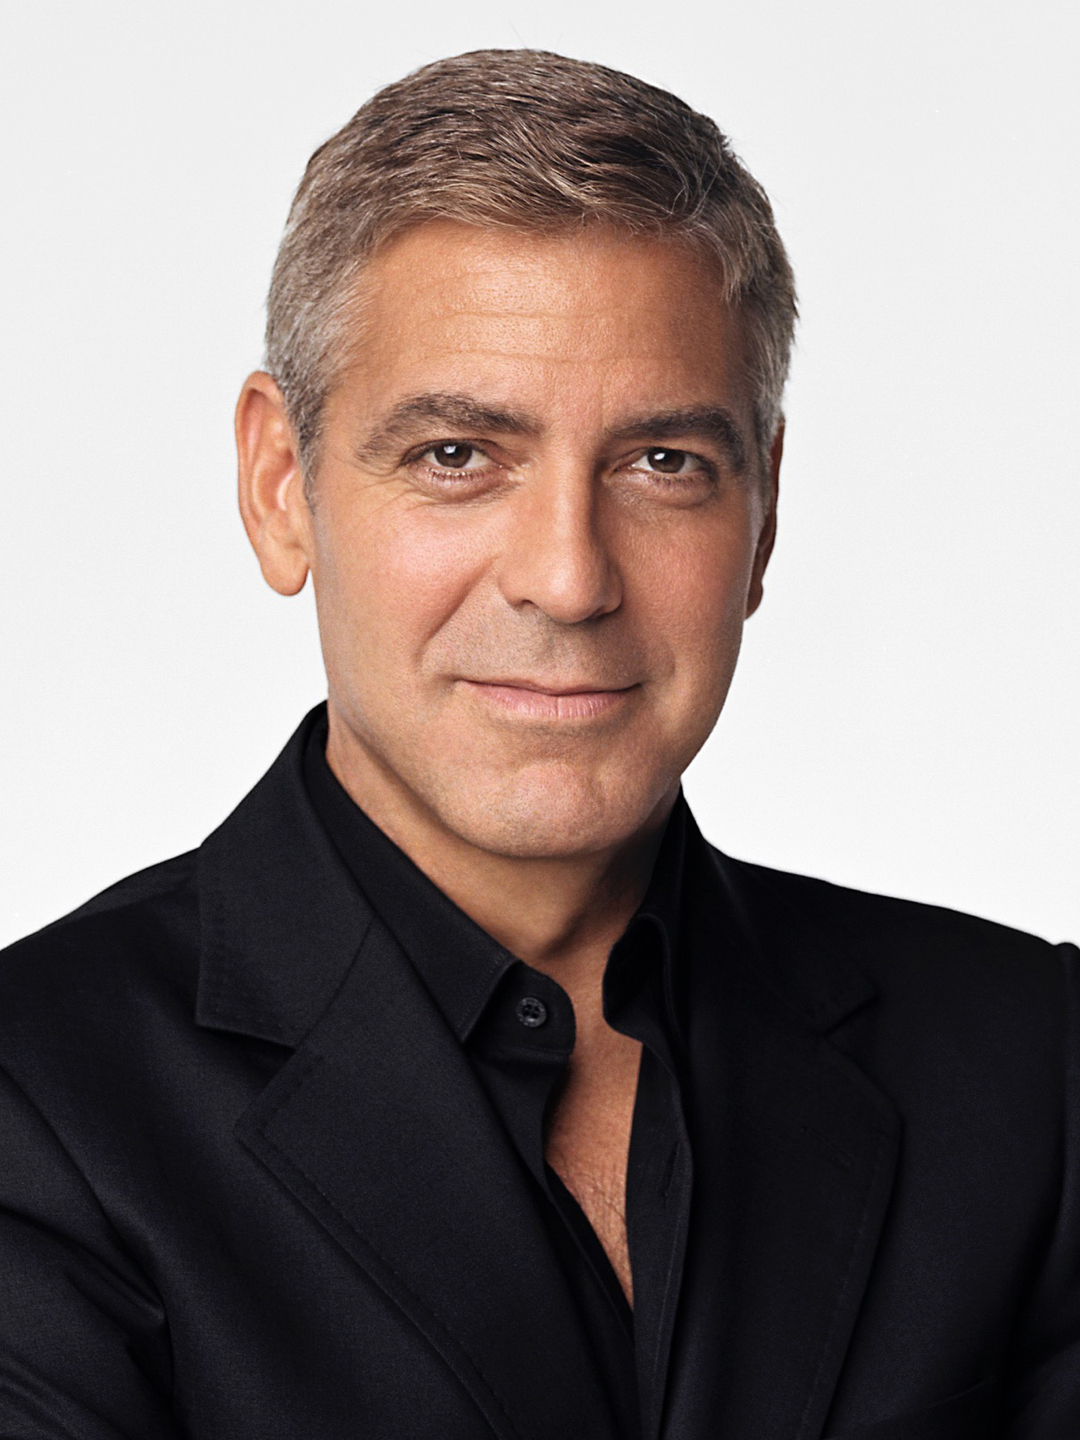 George Clooney personal life